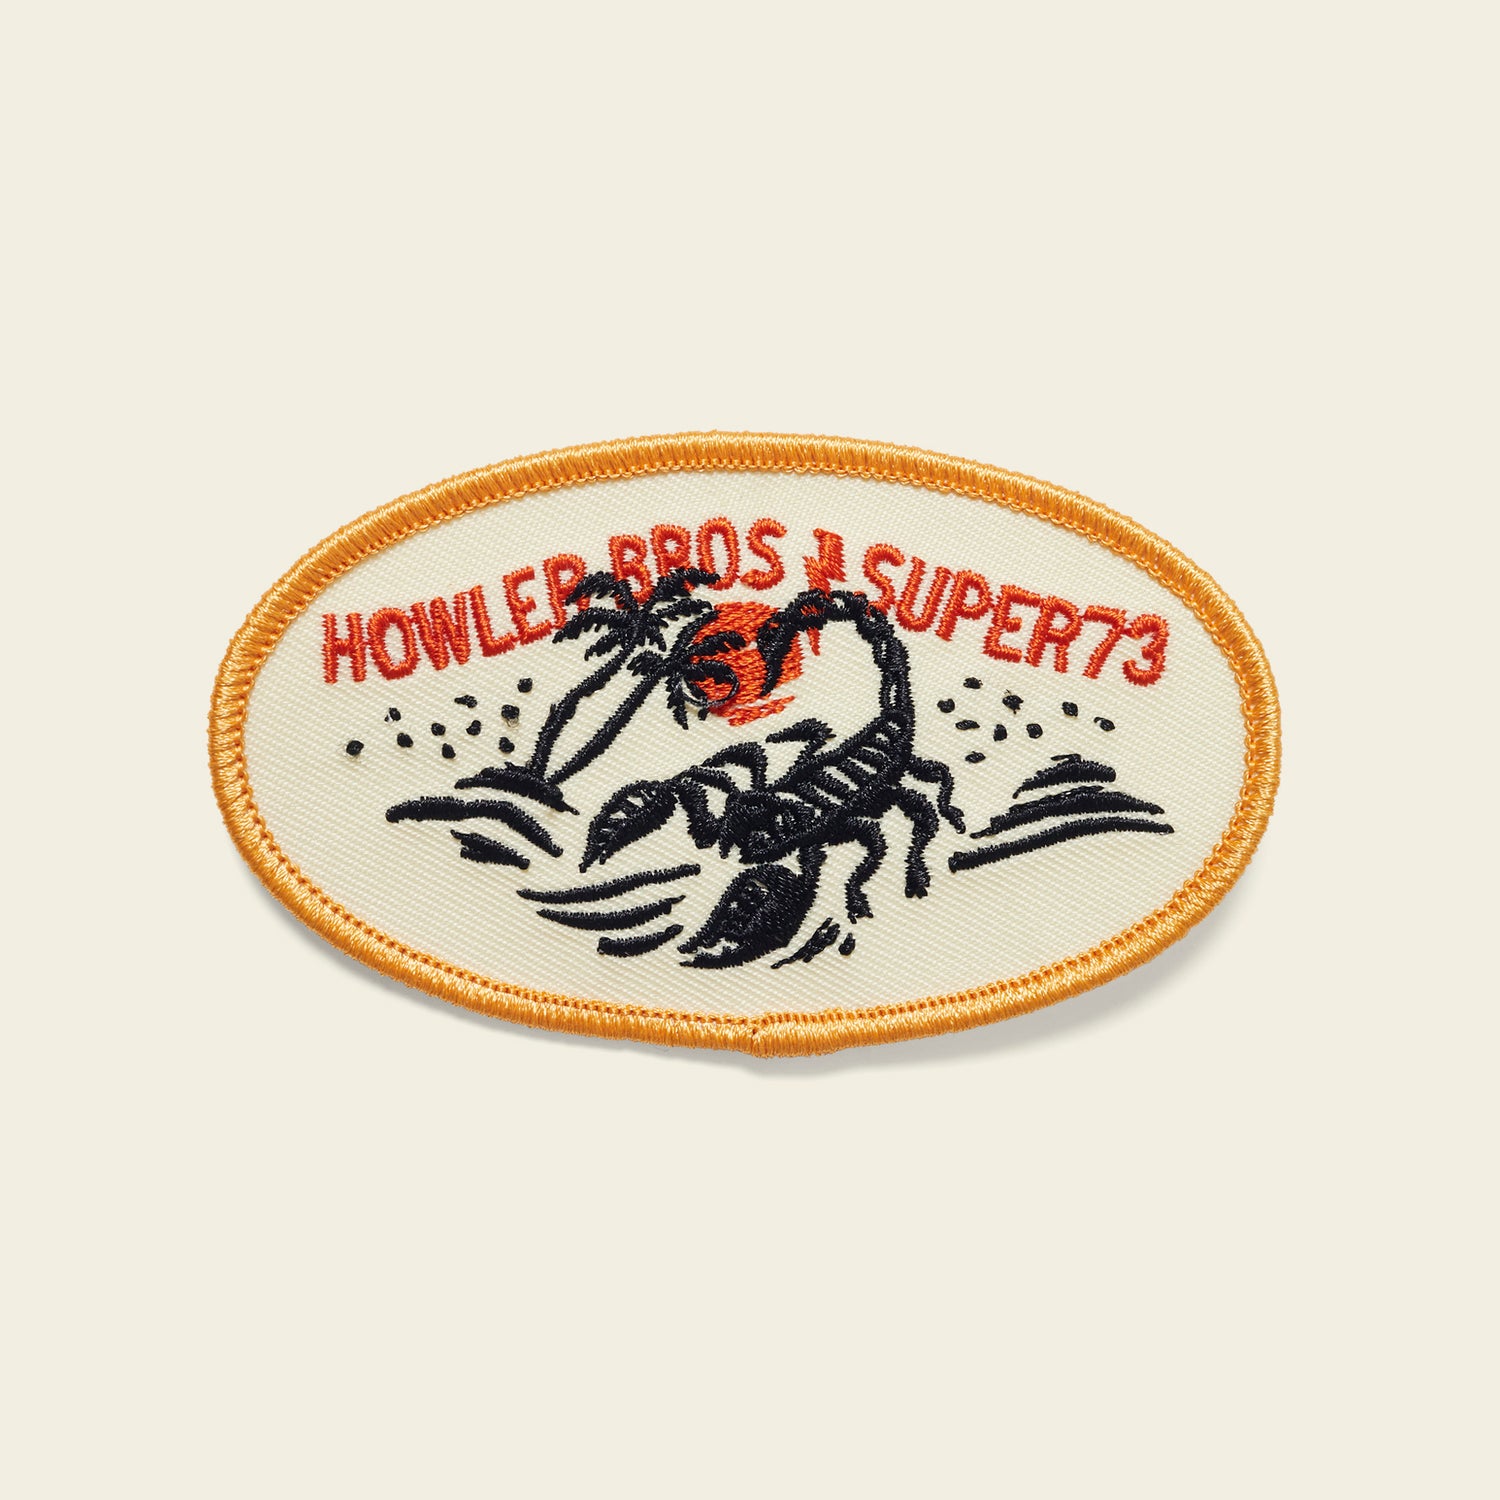 Howler Brothers x Super73 Patch